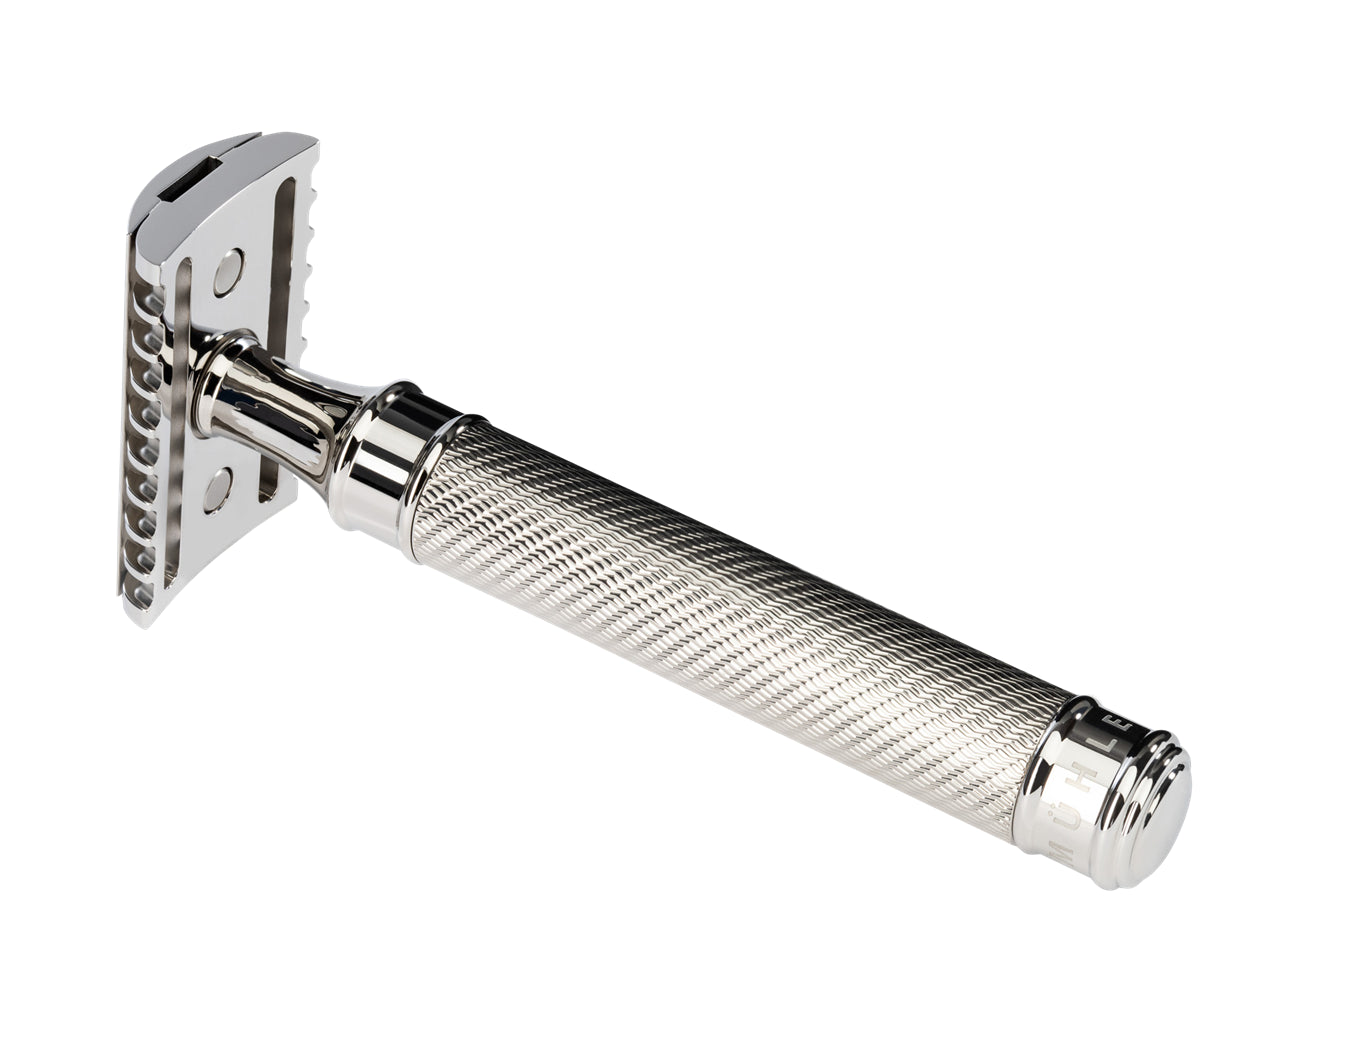 Muhle r41. Muhle r41 GS grande Stainless Steel. Бритва Muhle r41. Muhle open Comb Double Edge Safety Razor, r41. Muhle r41 Twist.